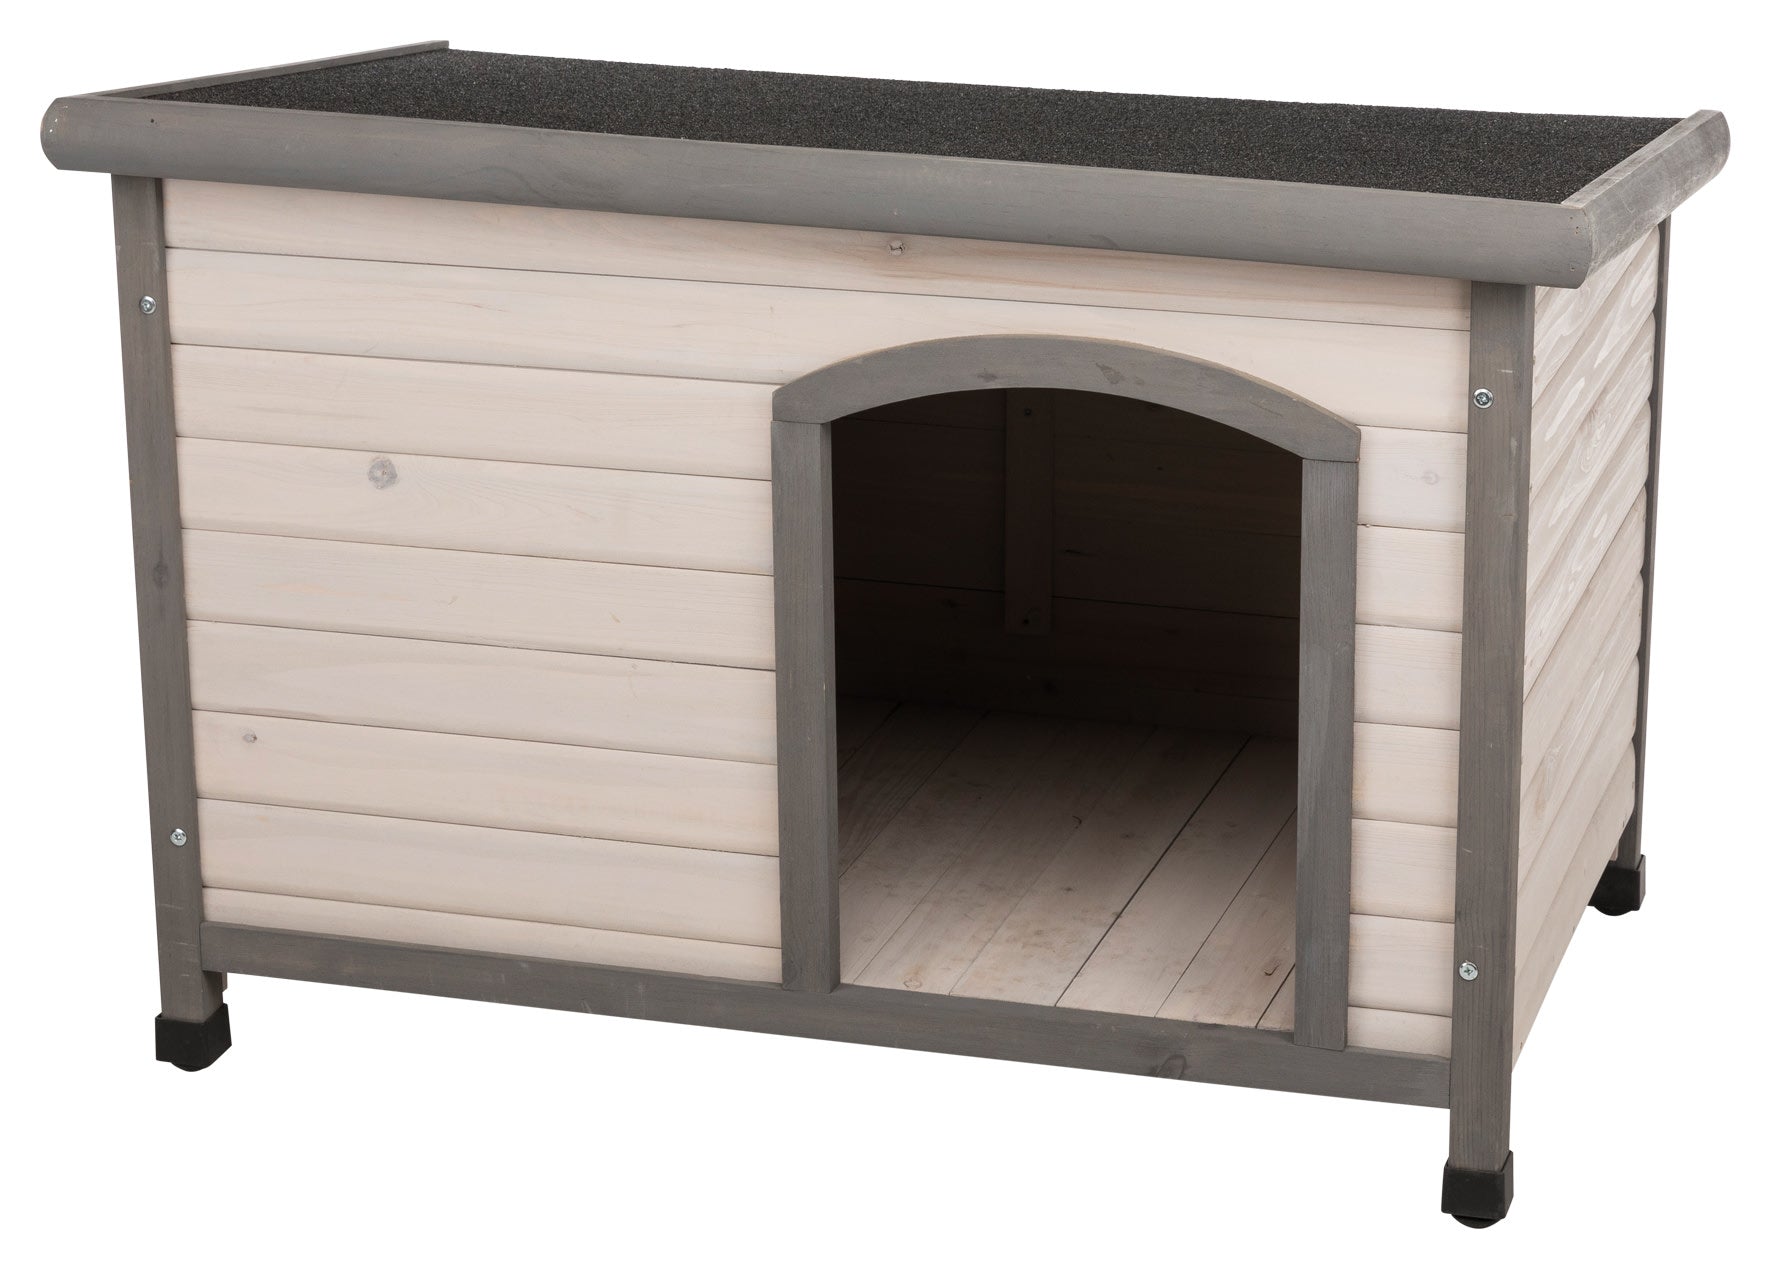 TRIXIE Natura Classic Dog House, Flat Hinged Roof, Adjustable Legs, Gray Small